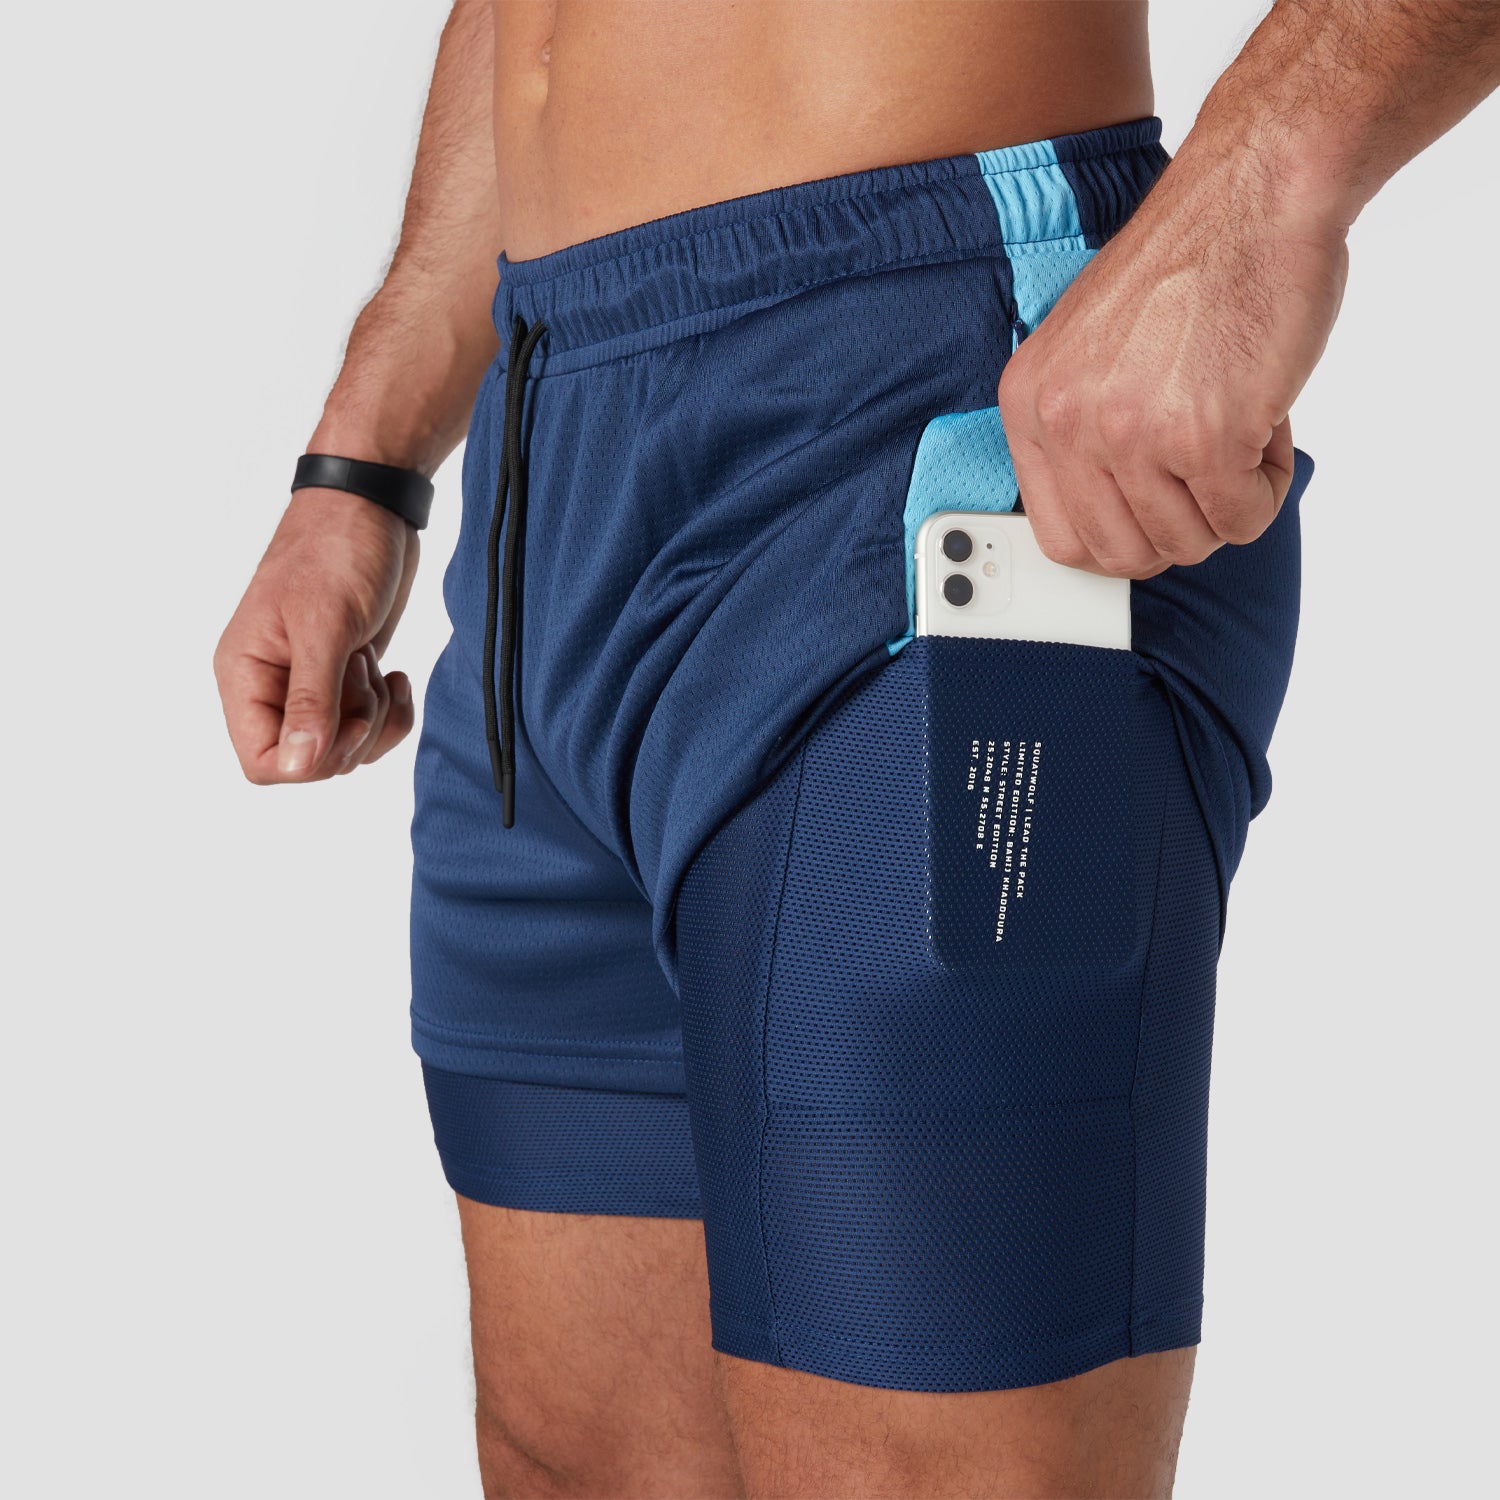 squatwolf-gym-wear-hybrid-performance-2-in-1-shorts-navy-workout-shorts-for-men